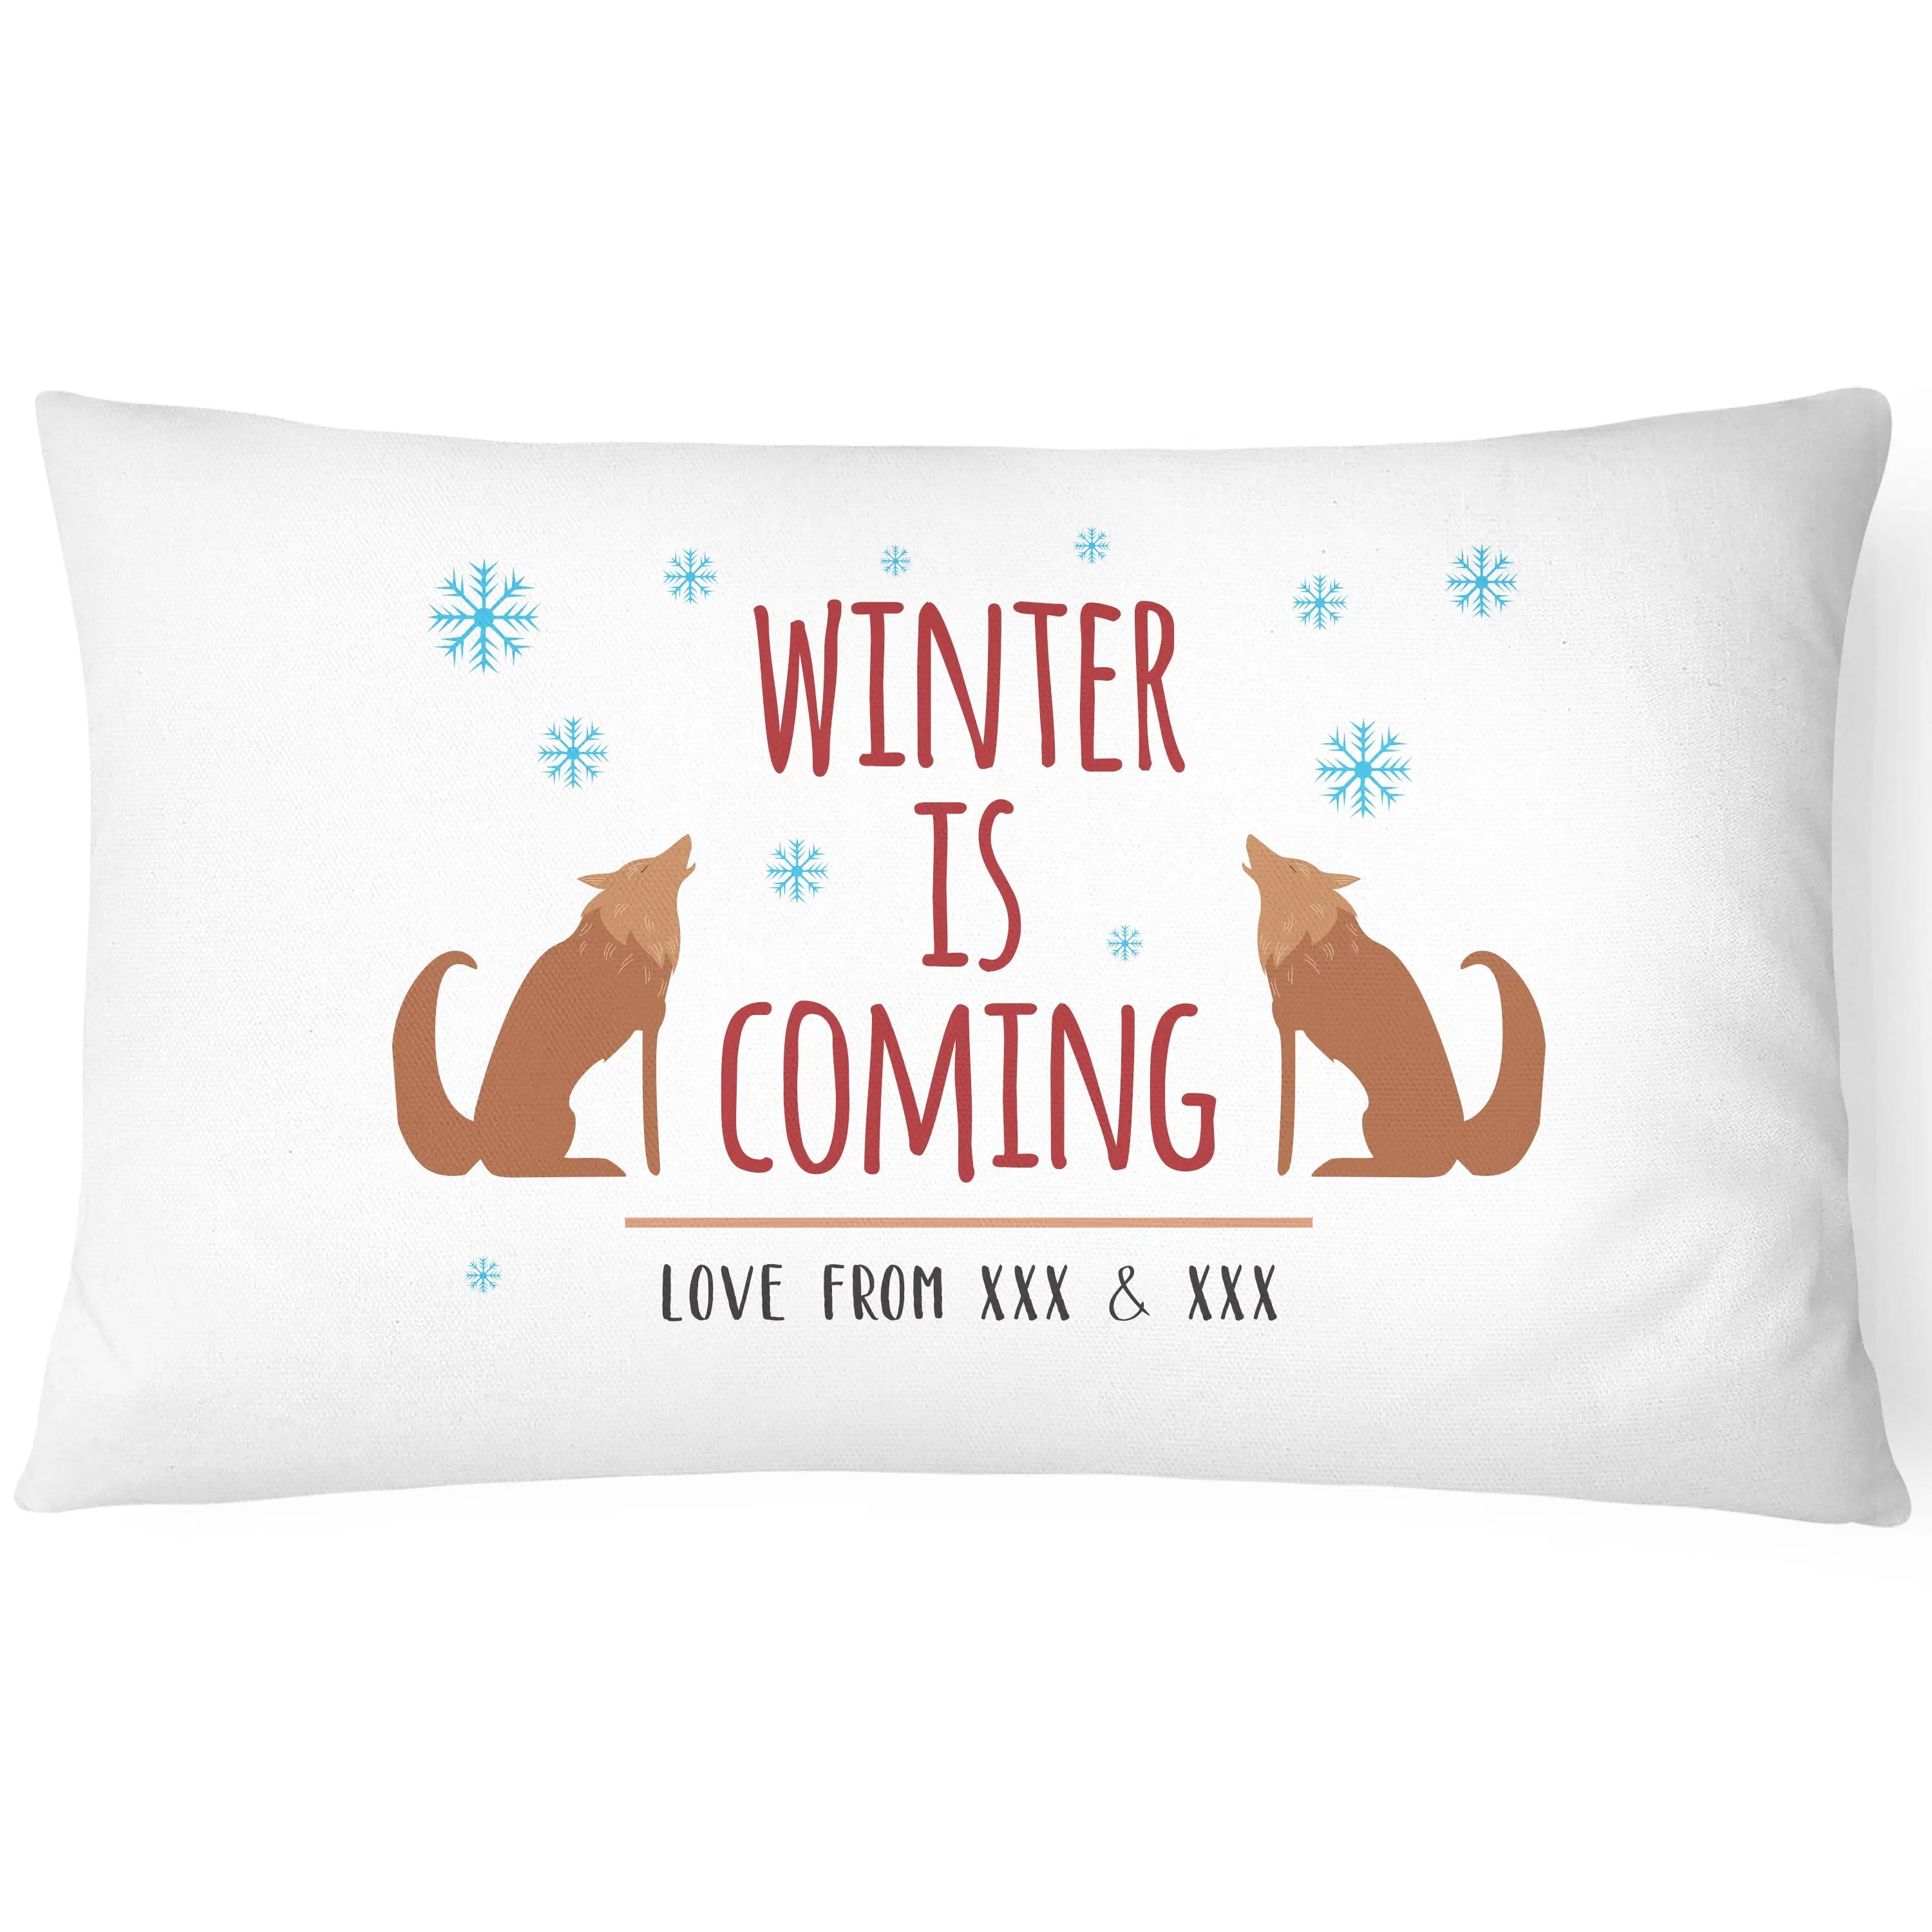 Personalised Christmas Pillowcase - Winter Is Coming - CushionPop